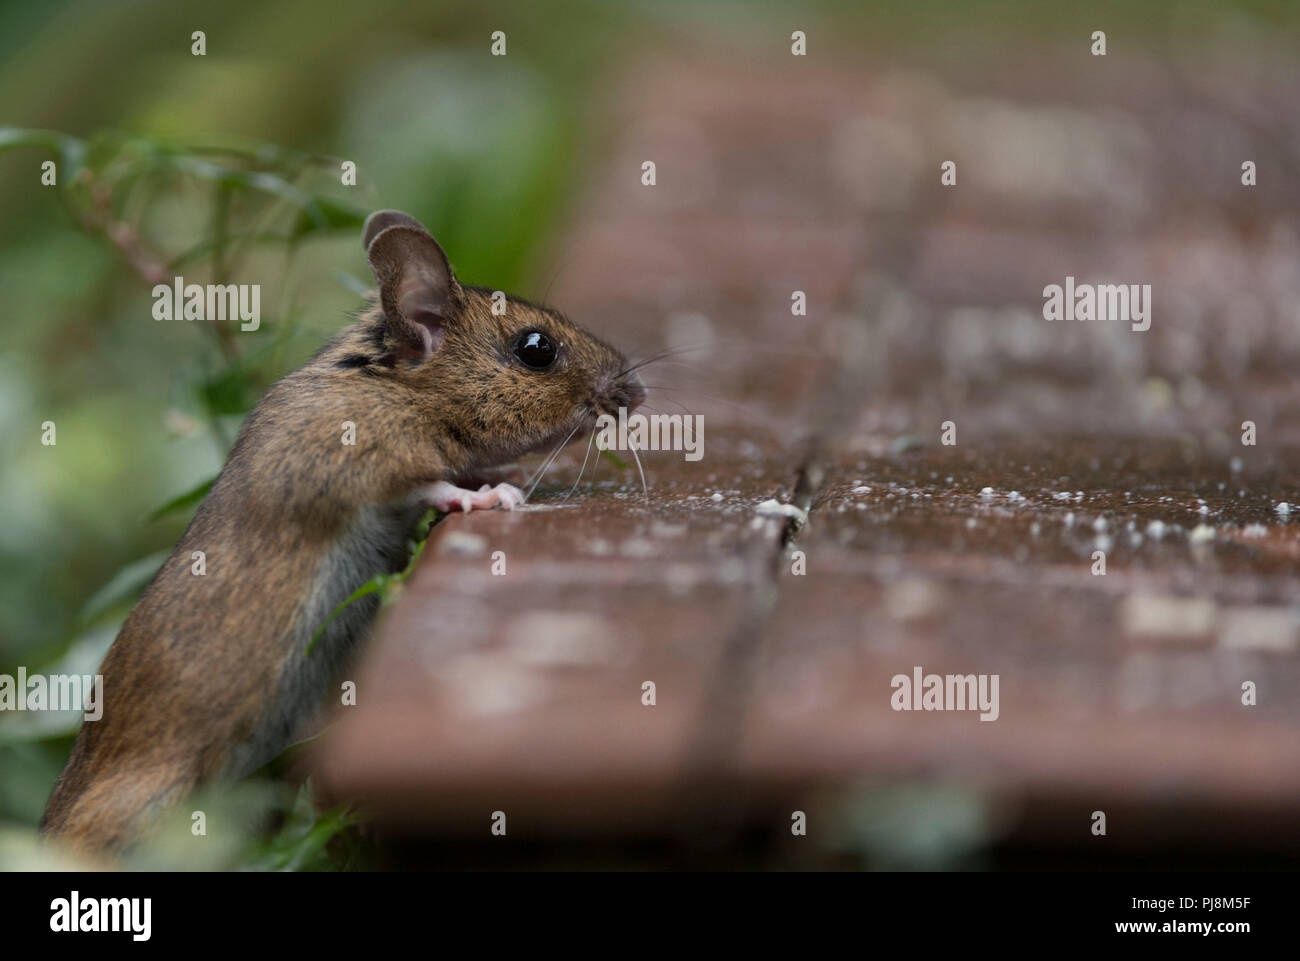 Fieldmouse or woodlouse finding/eating sunflower seeds left out for birds Stock Photo